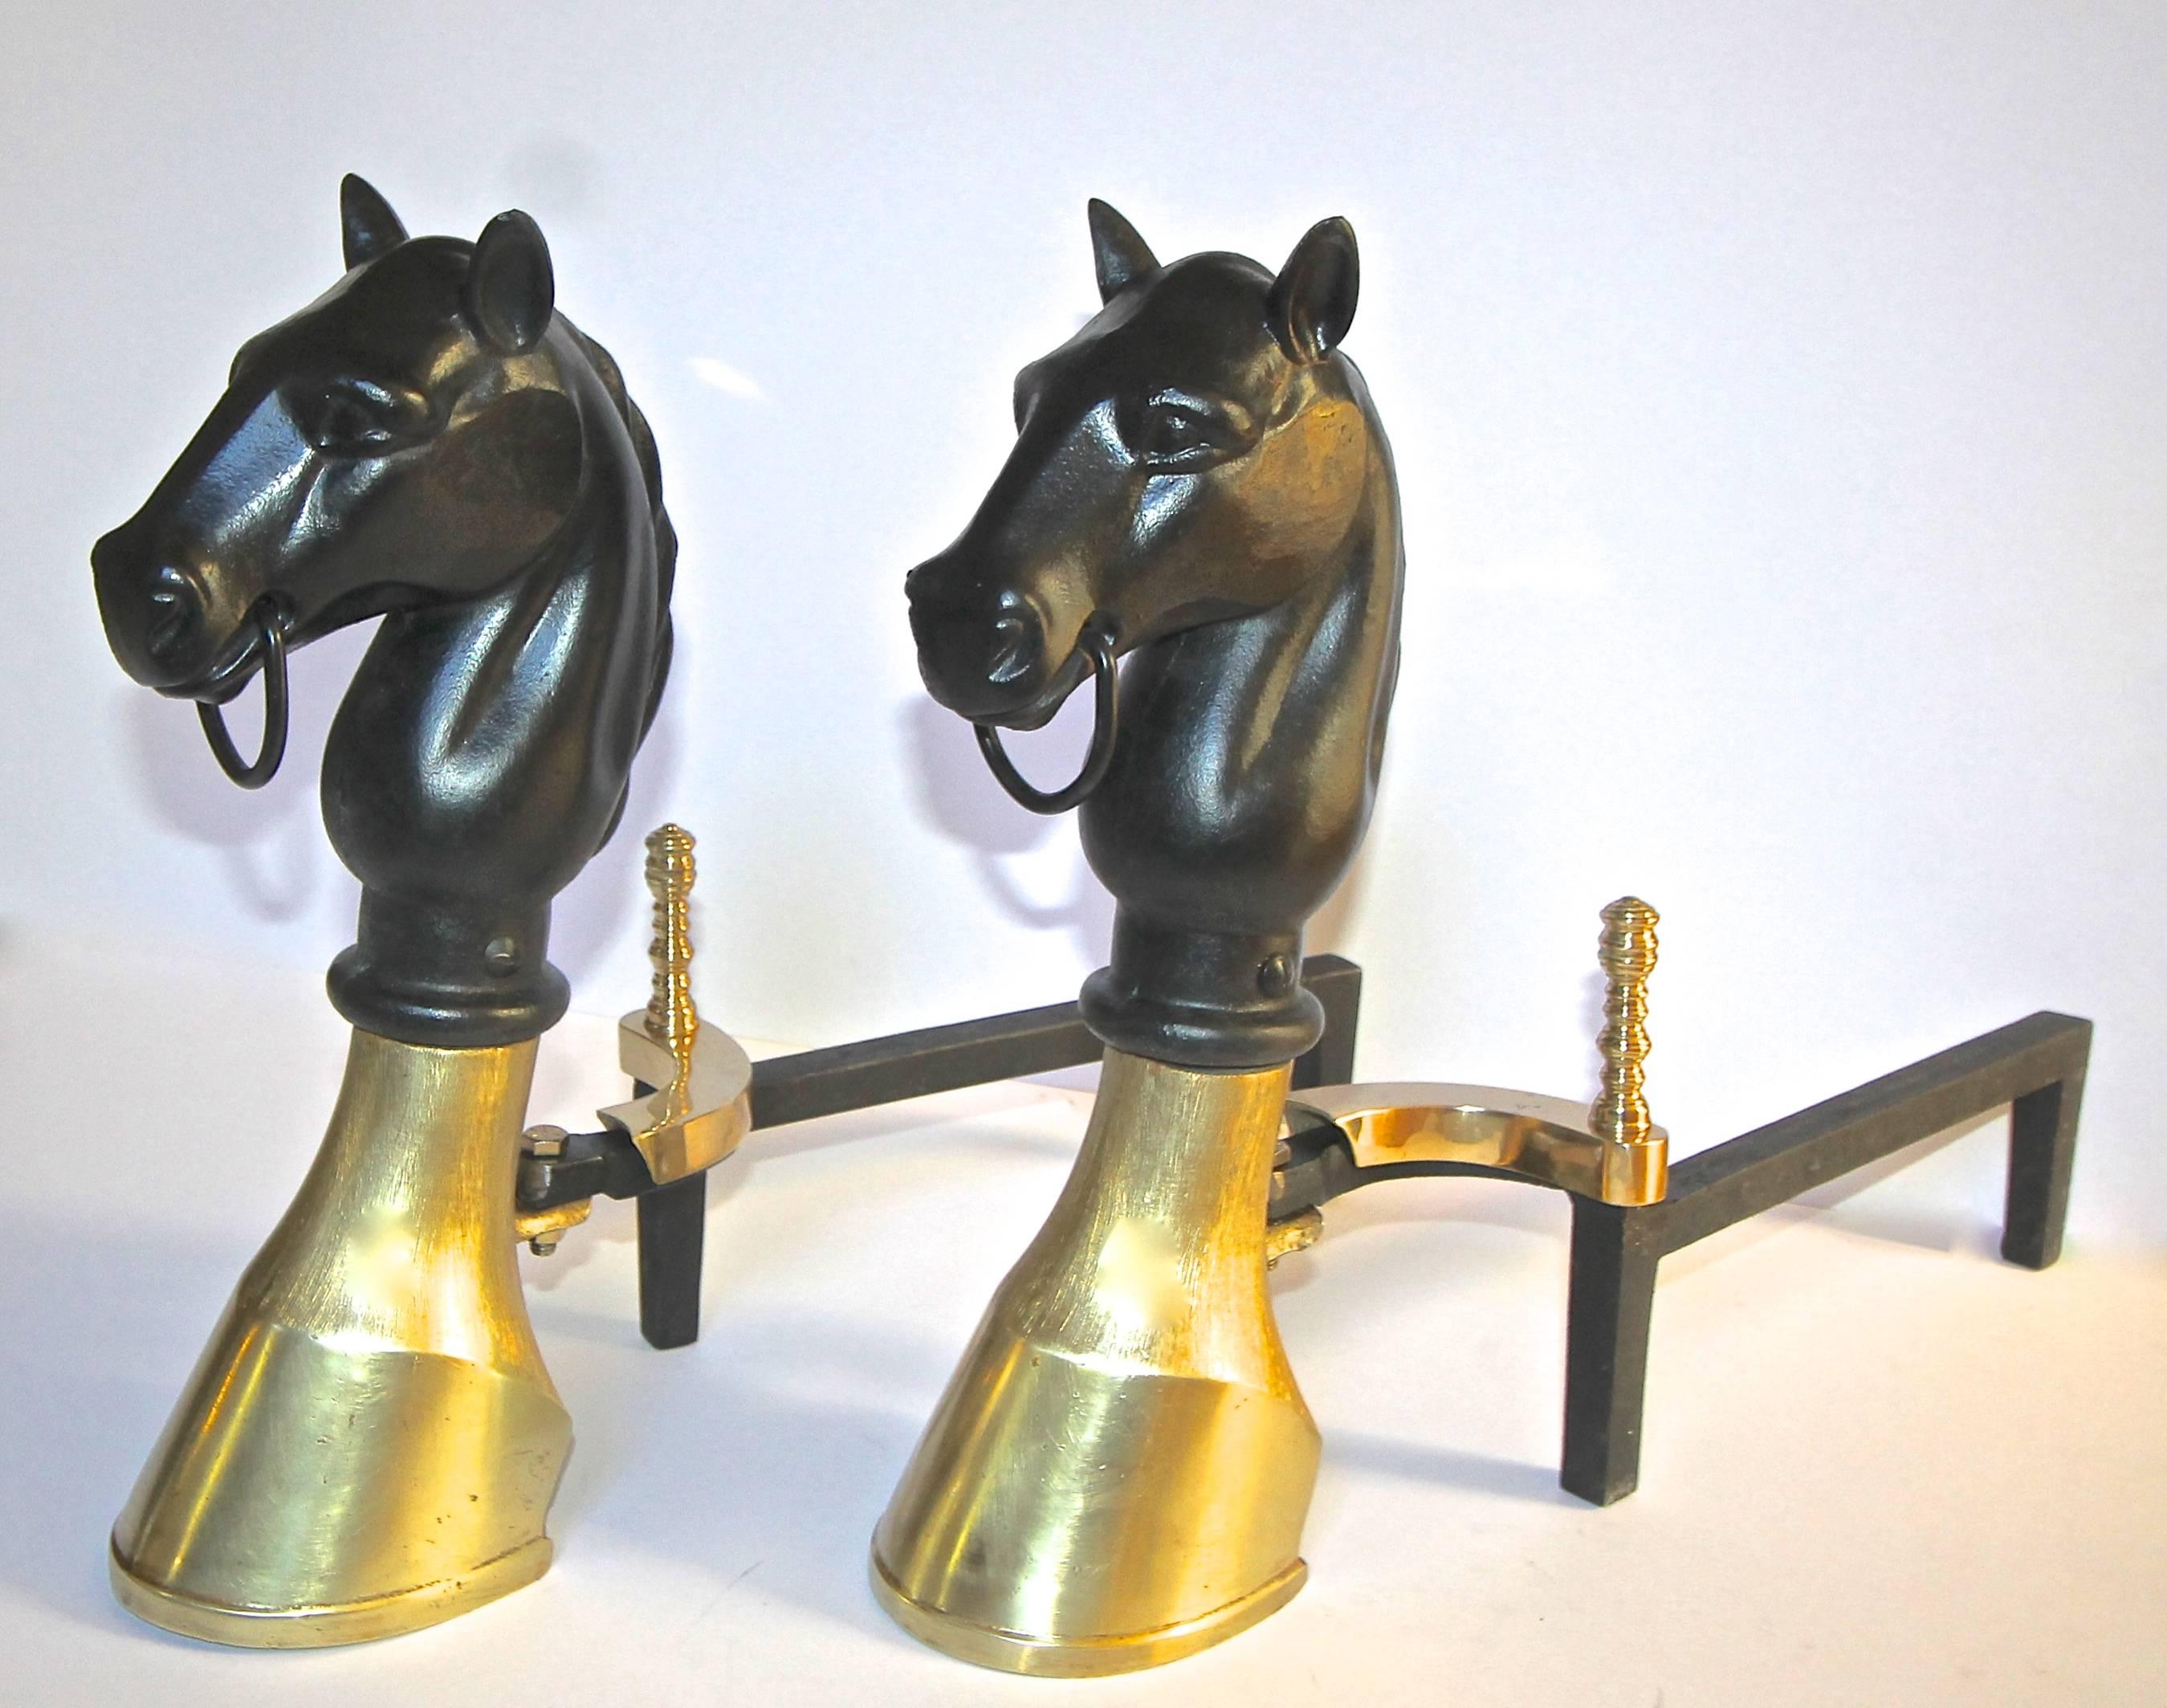 A very handsome pair of brass and cast iron andirons with a horse head and hoof motif.